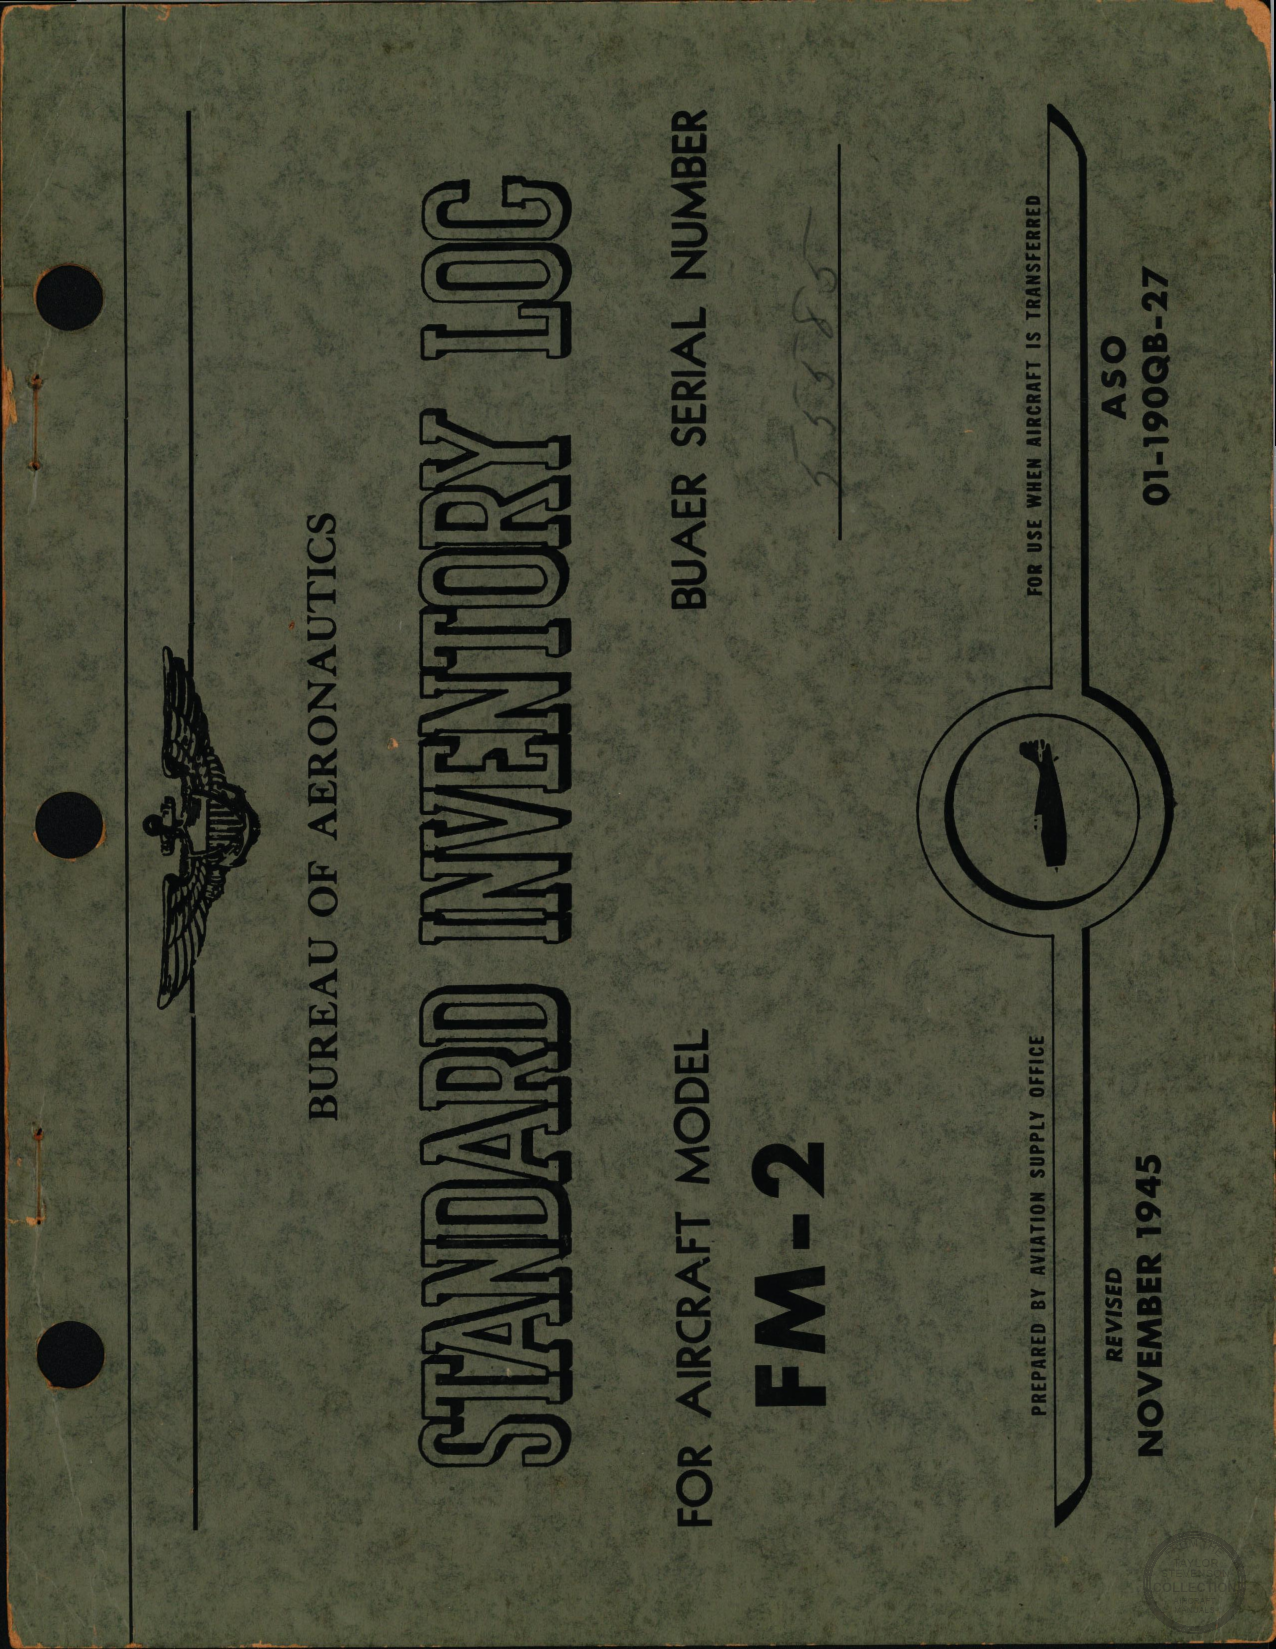 Sample page 1 from AirCorps Library document: Bureau of Aeronautics Standard Inventory Log, FM-2 Wildcat